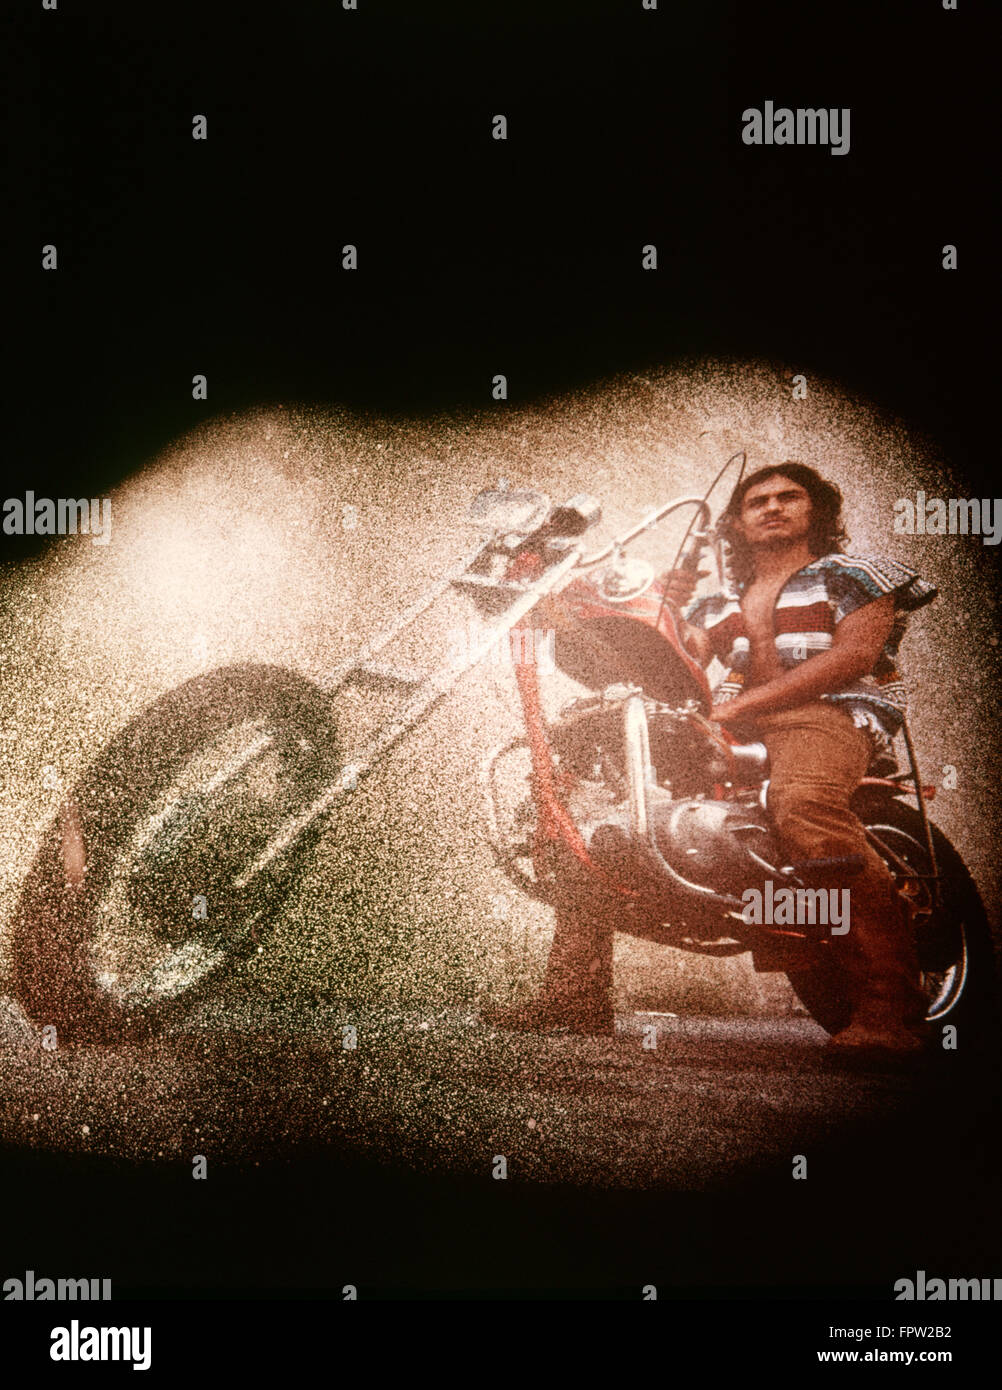 1970s HISPANIC HIPPIE SYTLE MAN ON CHOPPER MOTORCYCLE WEARING SERAPE VEST SPECIAL VISUAL TEXTURED EFFECT Stock Photo